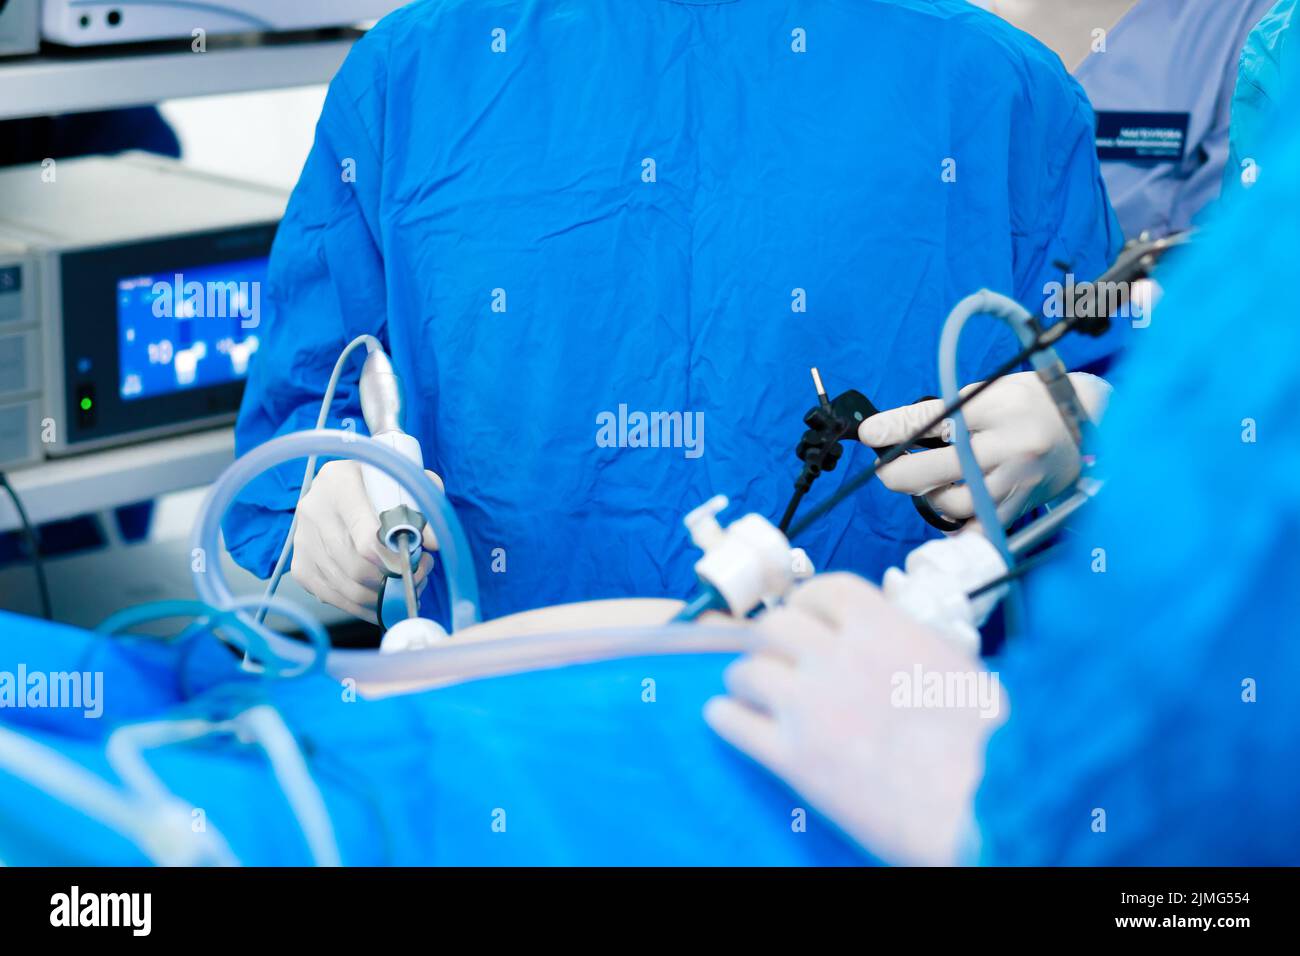 Hands of surgeons with surgical laparoscopic equipment. Stock Photo